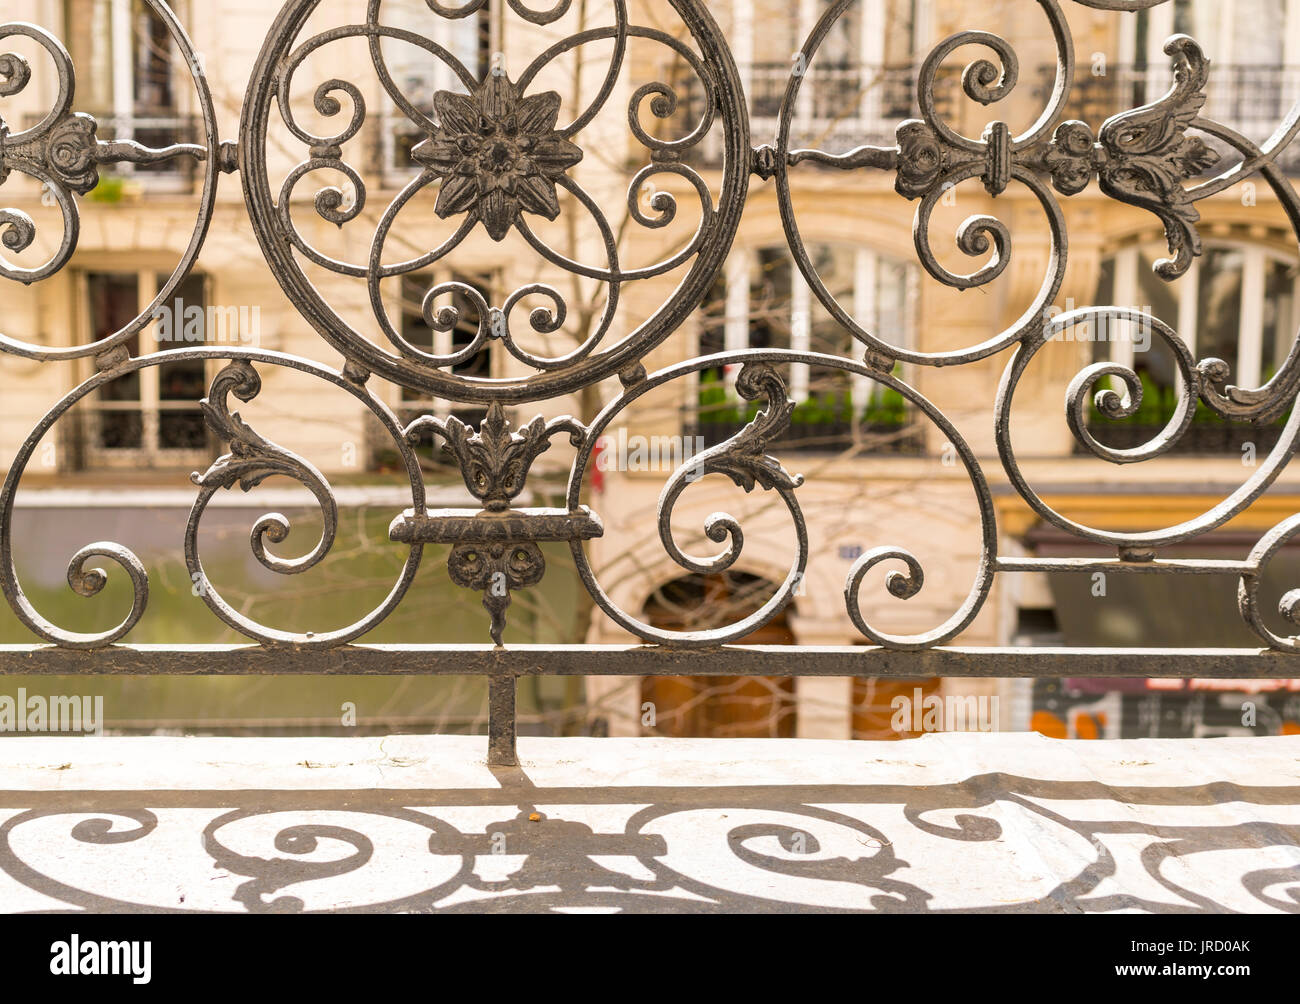 Balcony with decorative railing and shutters in Paris, France Stock Photo